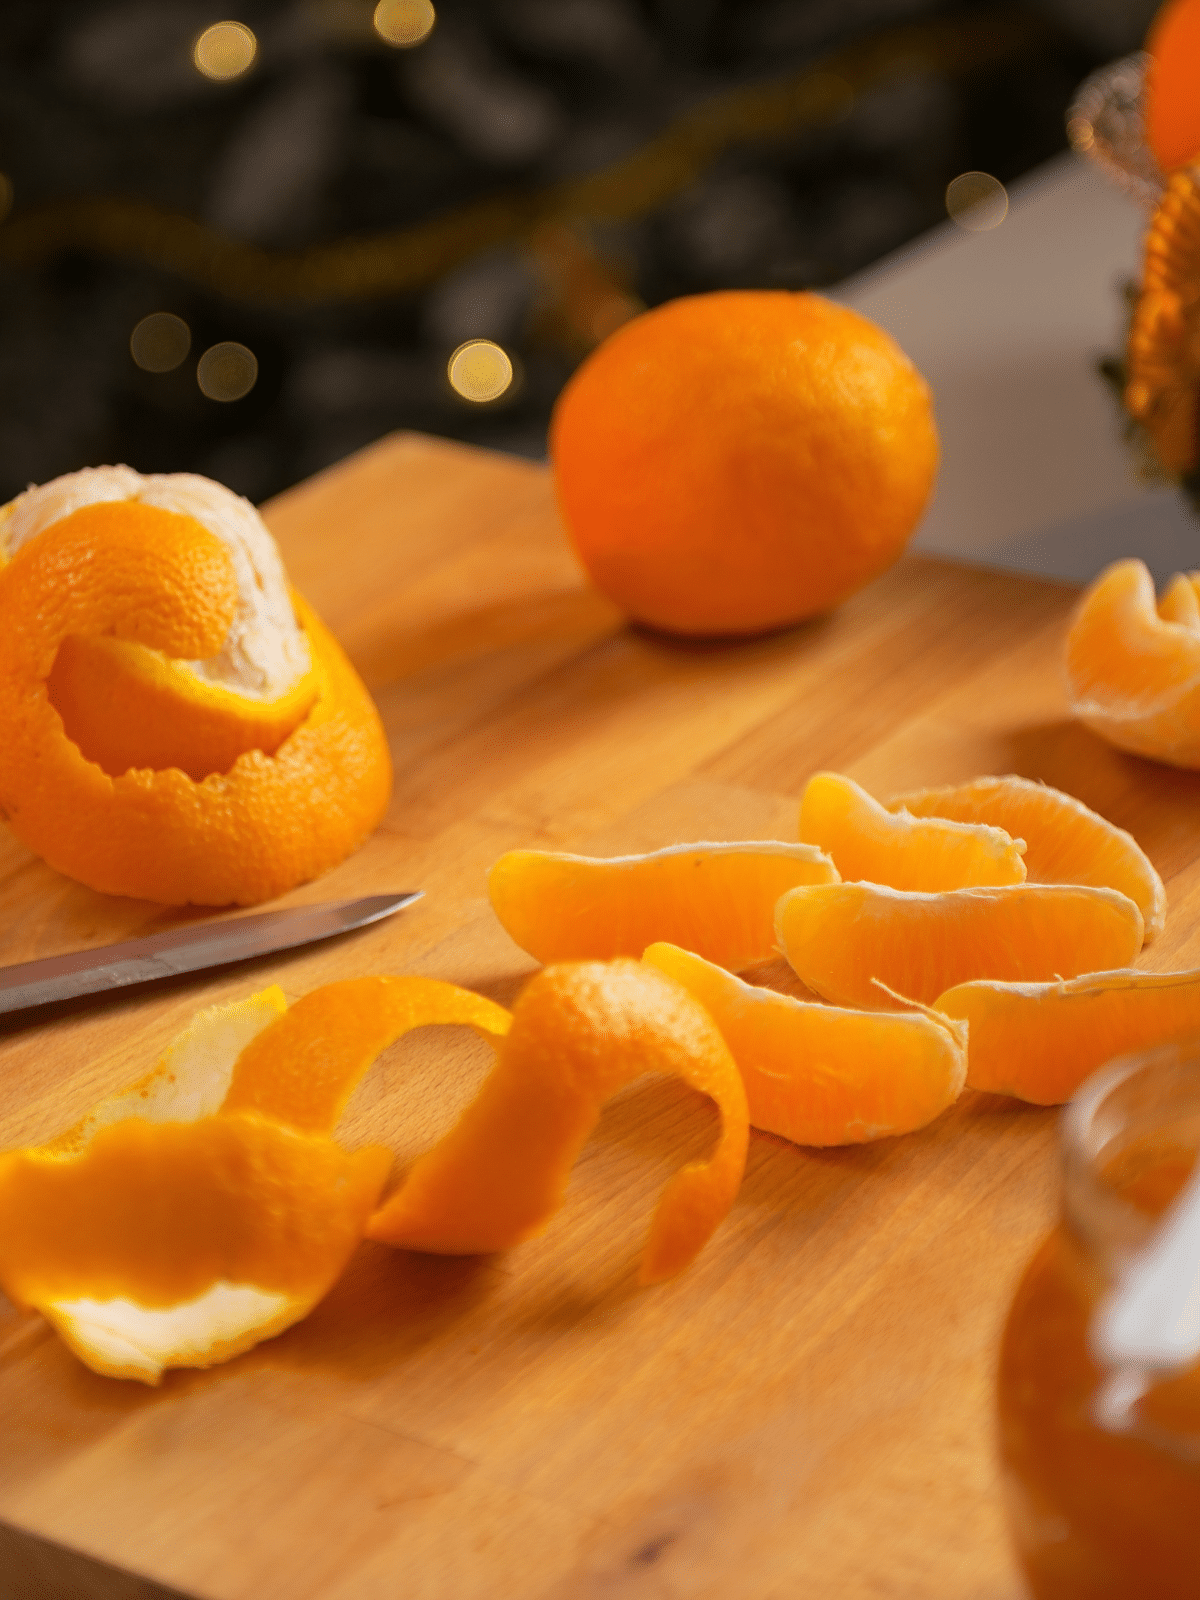 what can i do with leftover orange peels? A small orange peeled on a cutting board